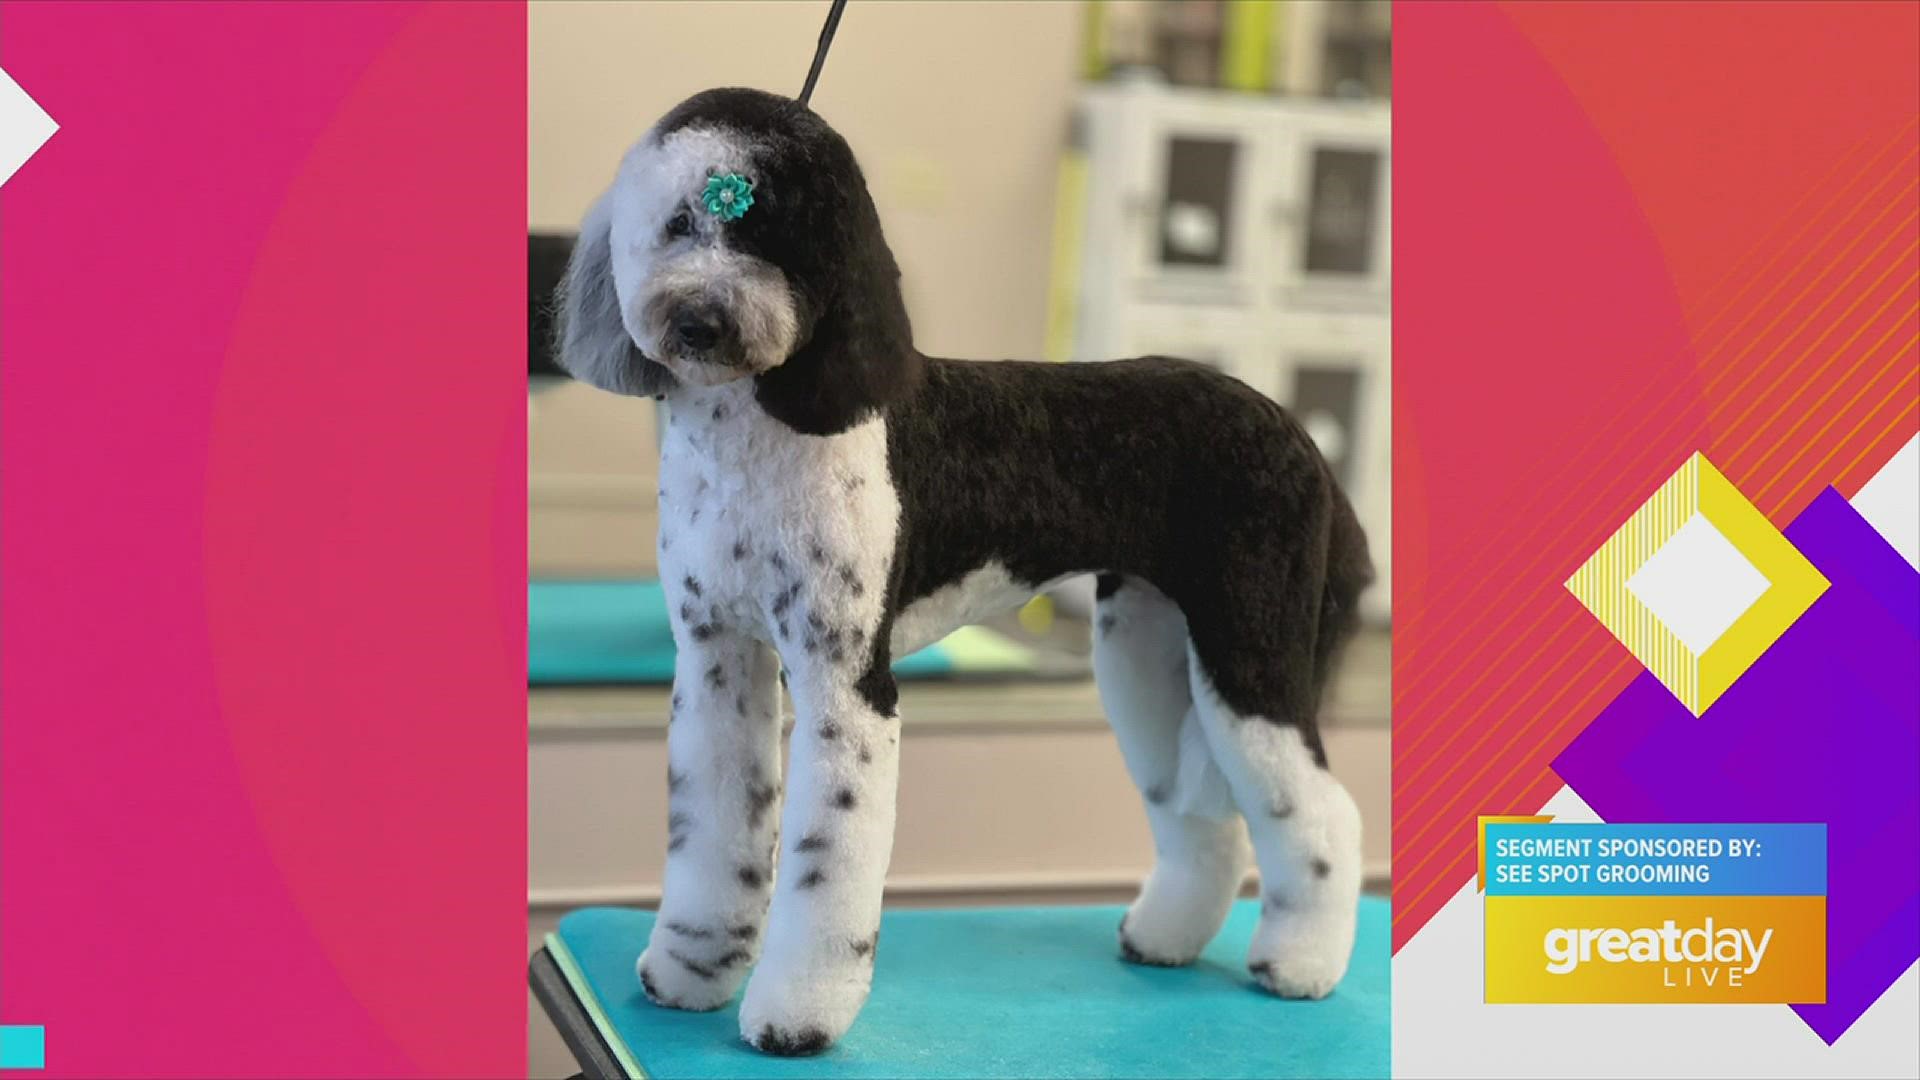 See Spot Grooming has three area locations: 4202 Shelbyville Rd., 2420 Lime Kiln Ln., and 5909 Timber Ridge Dr. They're also online at SeeSpotGrooming.com.